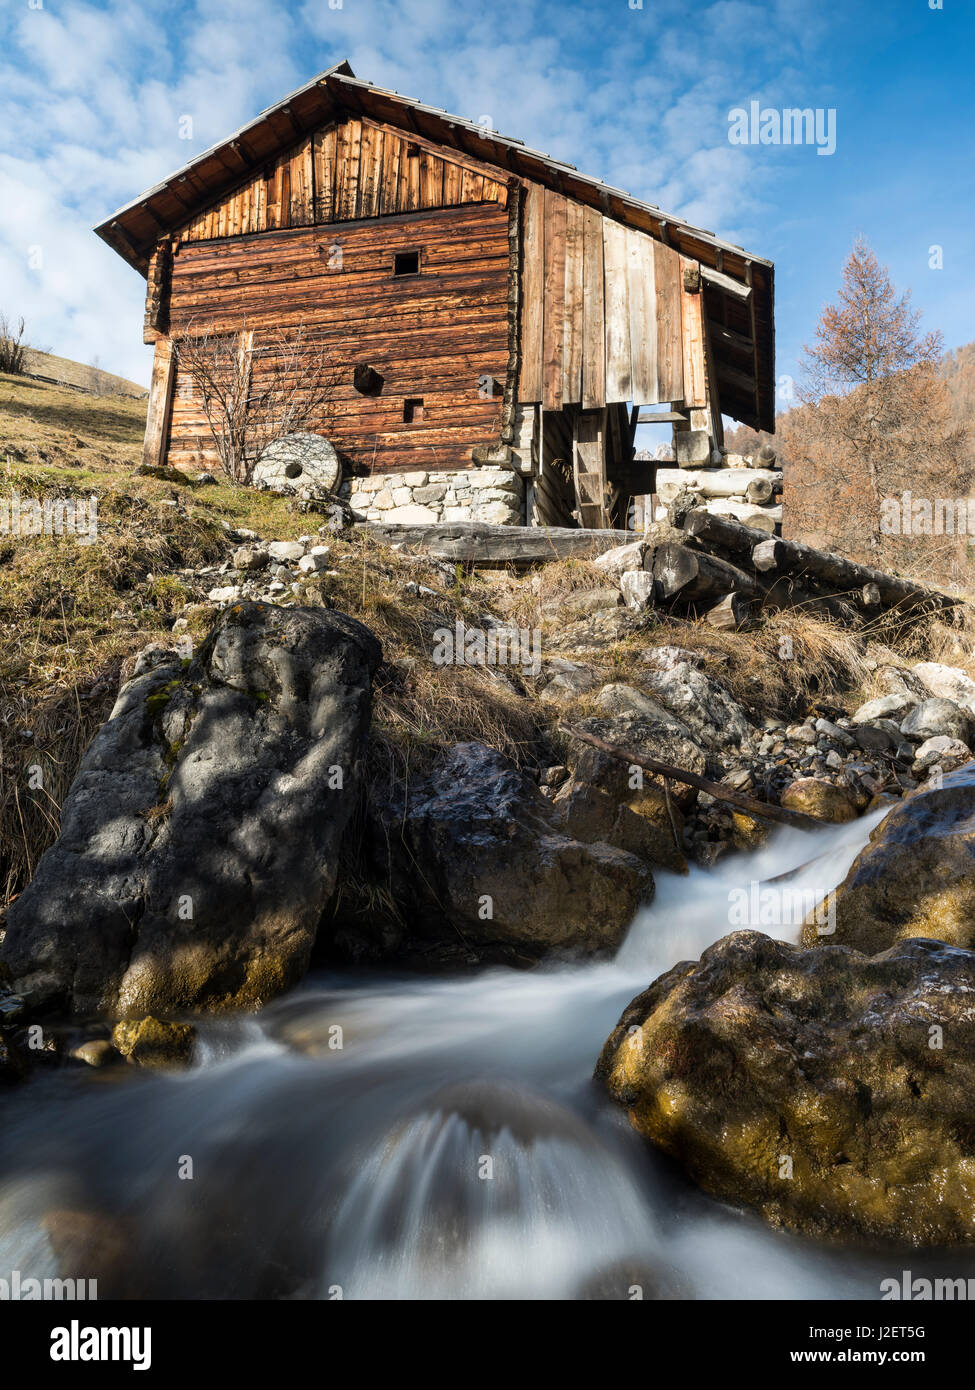 Traditional water mills of the viles (hamlets) of Mischi und Seres, village of Campill, in the Gader valley in the dolomites. Central Europe, South Tyrol, Italy (Large format sizes available) Stock Photo